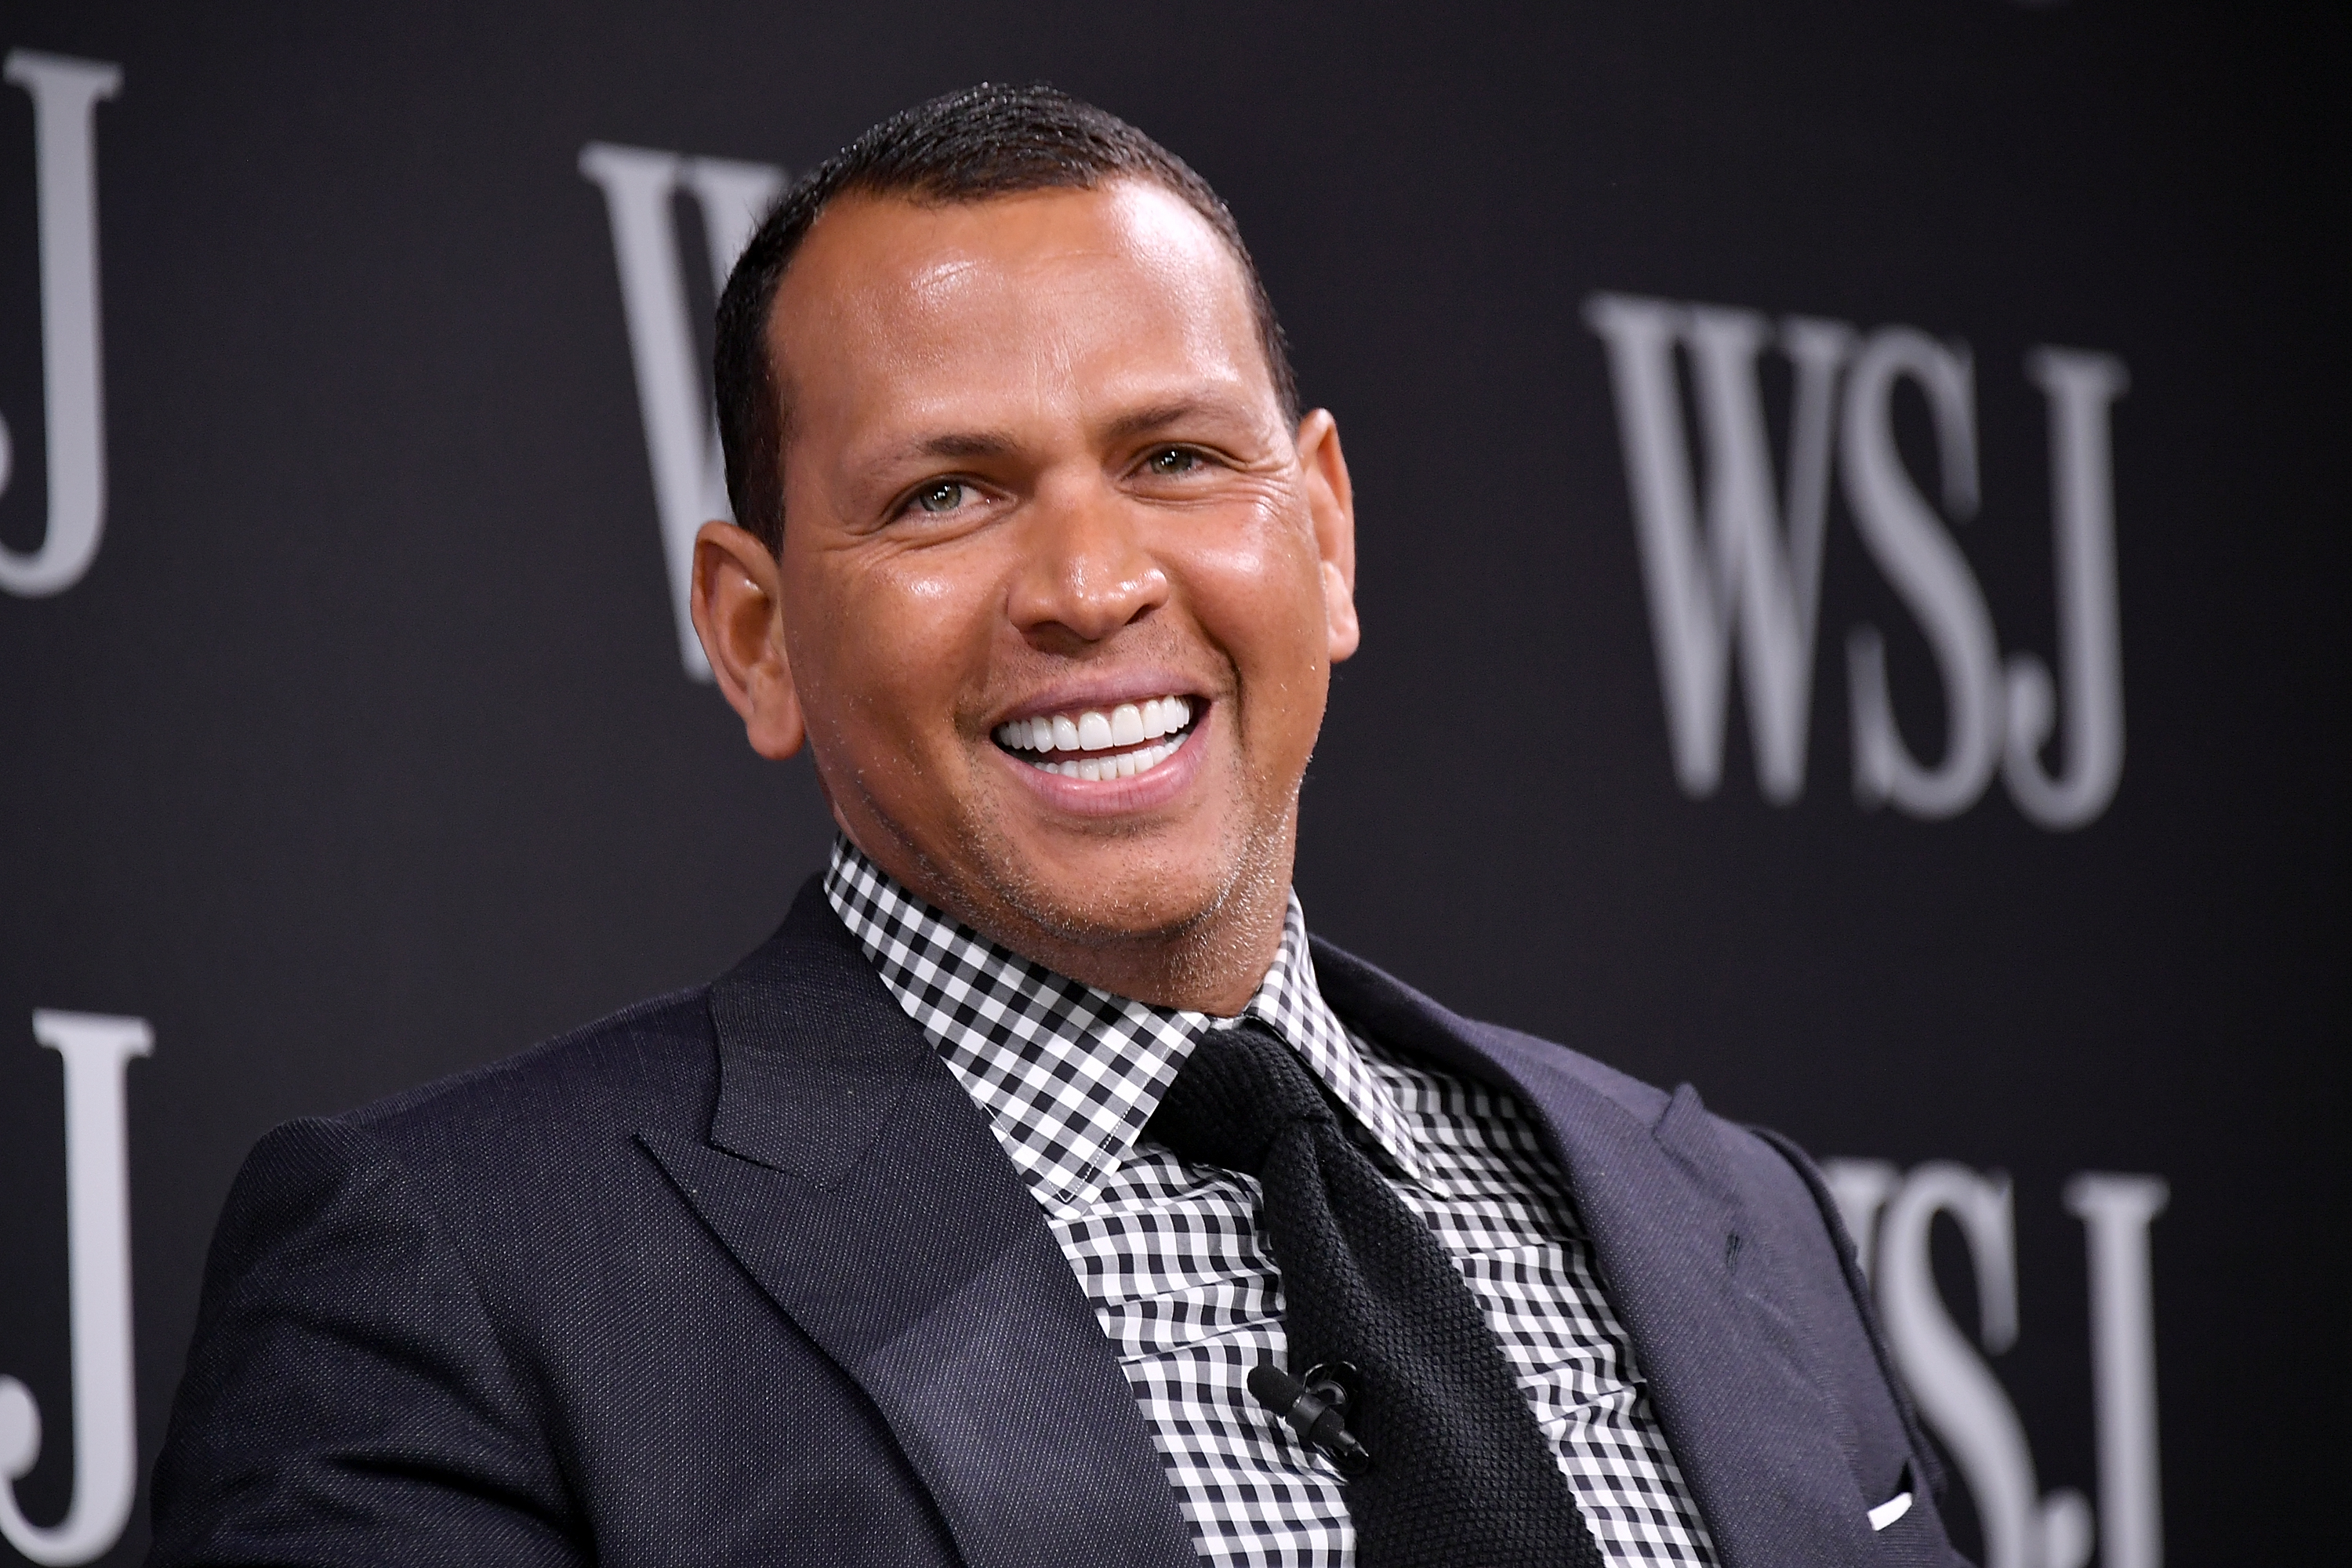 Alex Rodriguez reportedly got Madison LeCroy to sign an NDA to prevent her from leaking private DMs according to her co-worker – BroBible